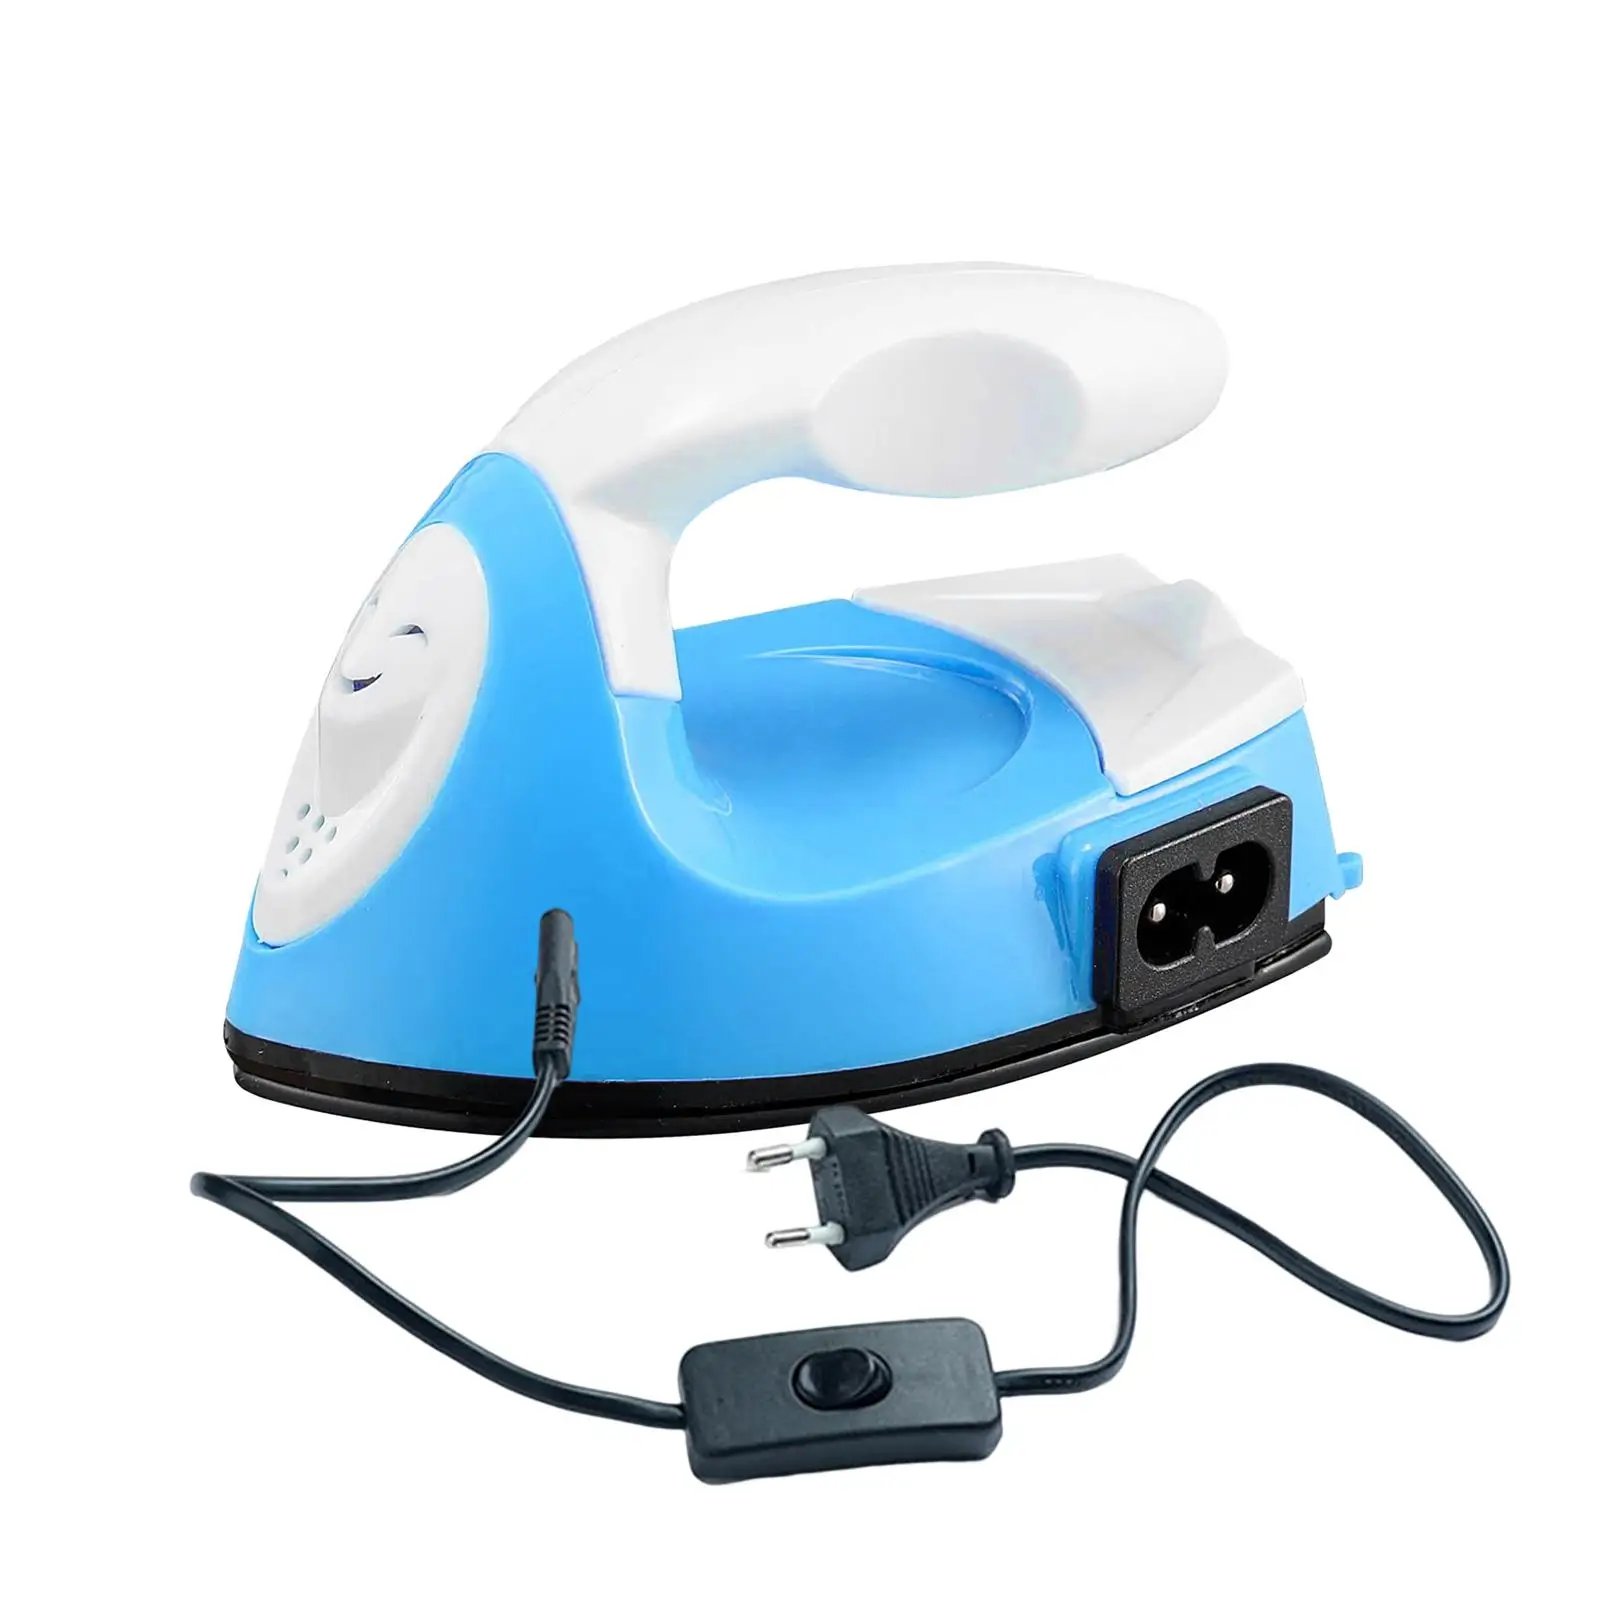 Mini Iron Sturdy Small Heat Transfer Portable Devices Multi Use Electric Iron for Vinyl Projects Shoes Home Garment EU Plug